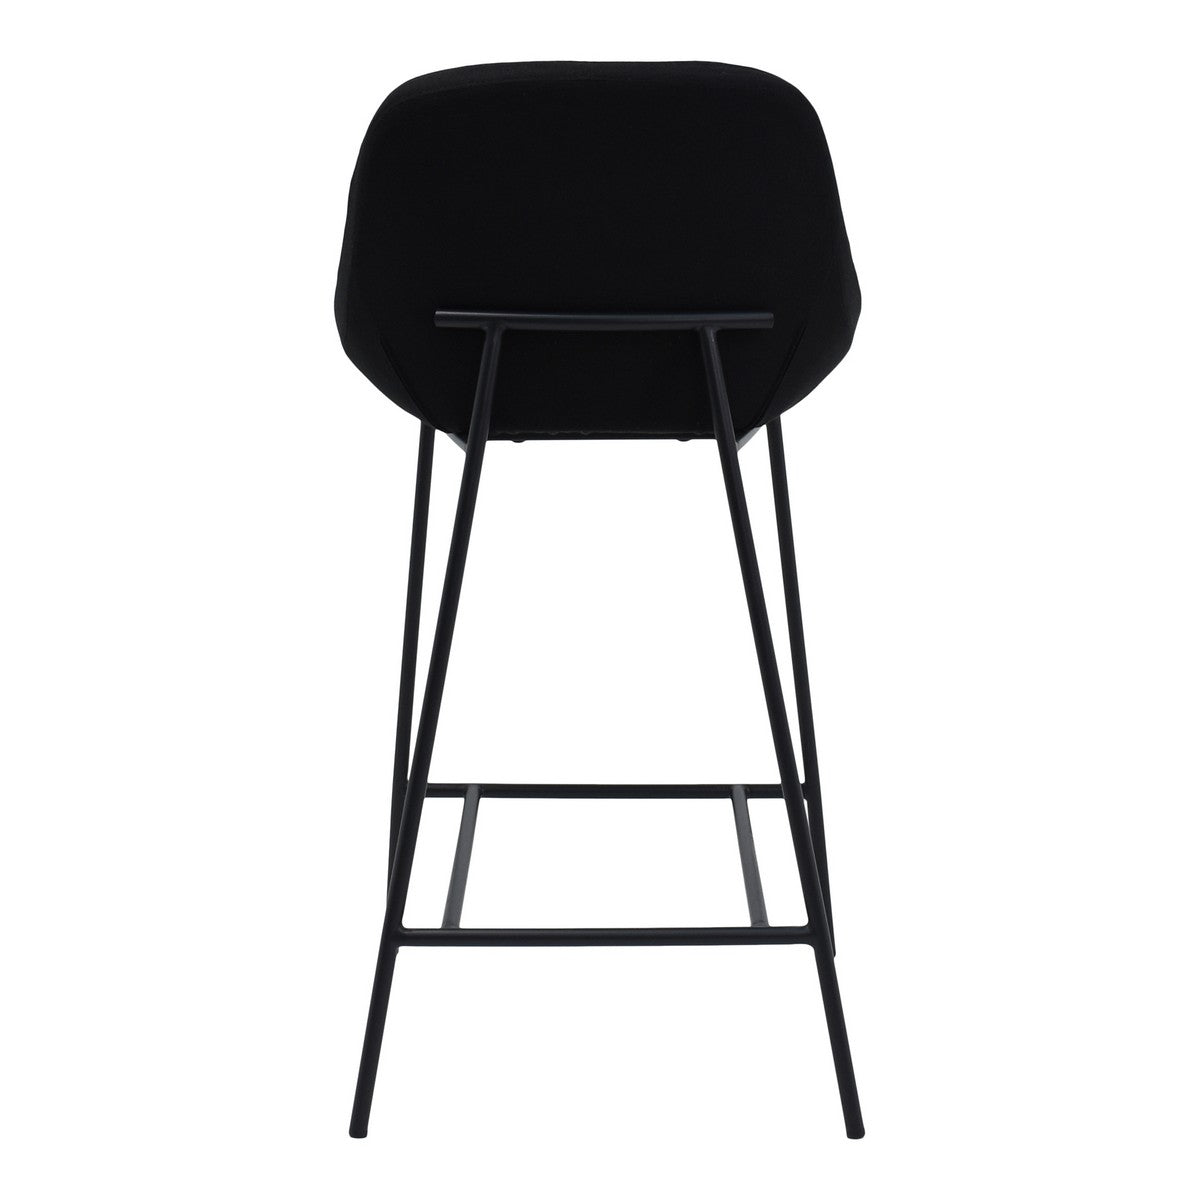 Moe's Home Collection Shelby Counter Stool Black - EJ-1038-02